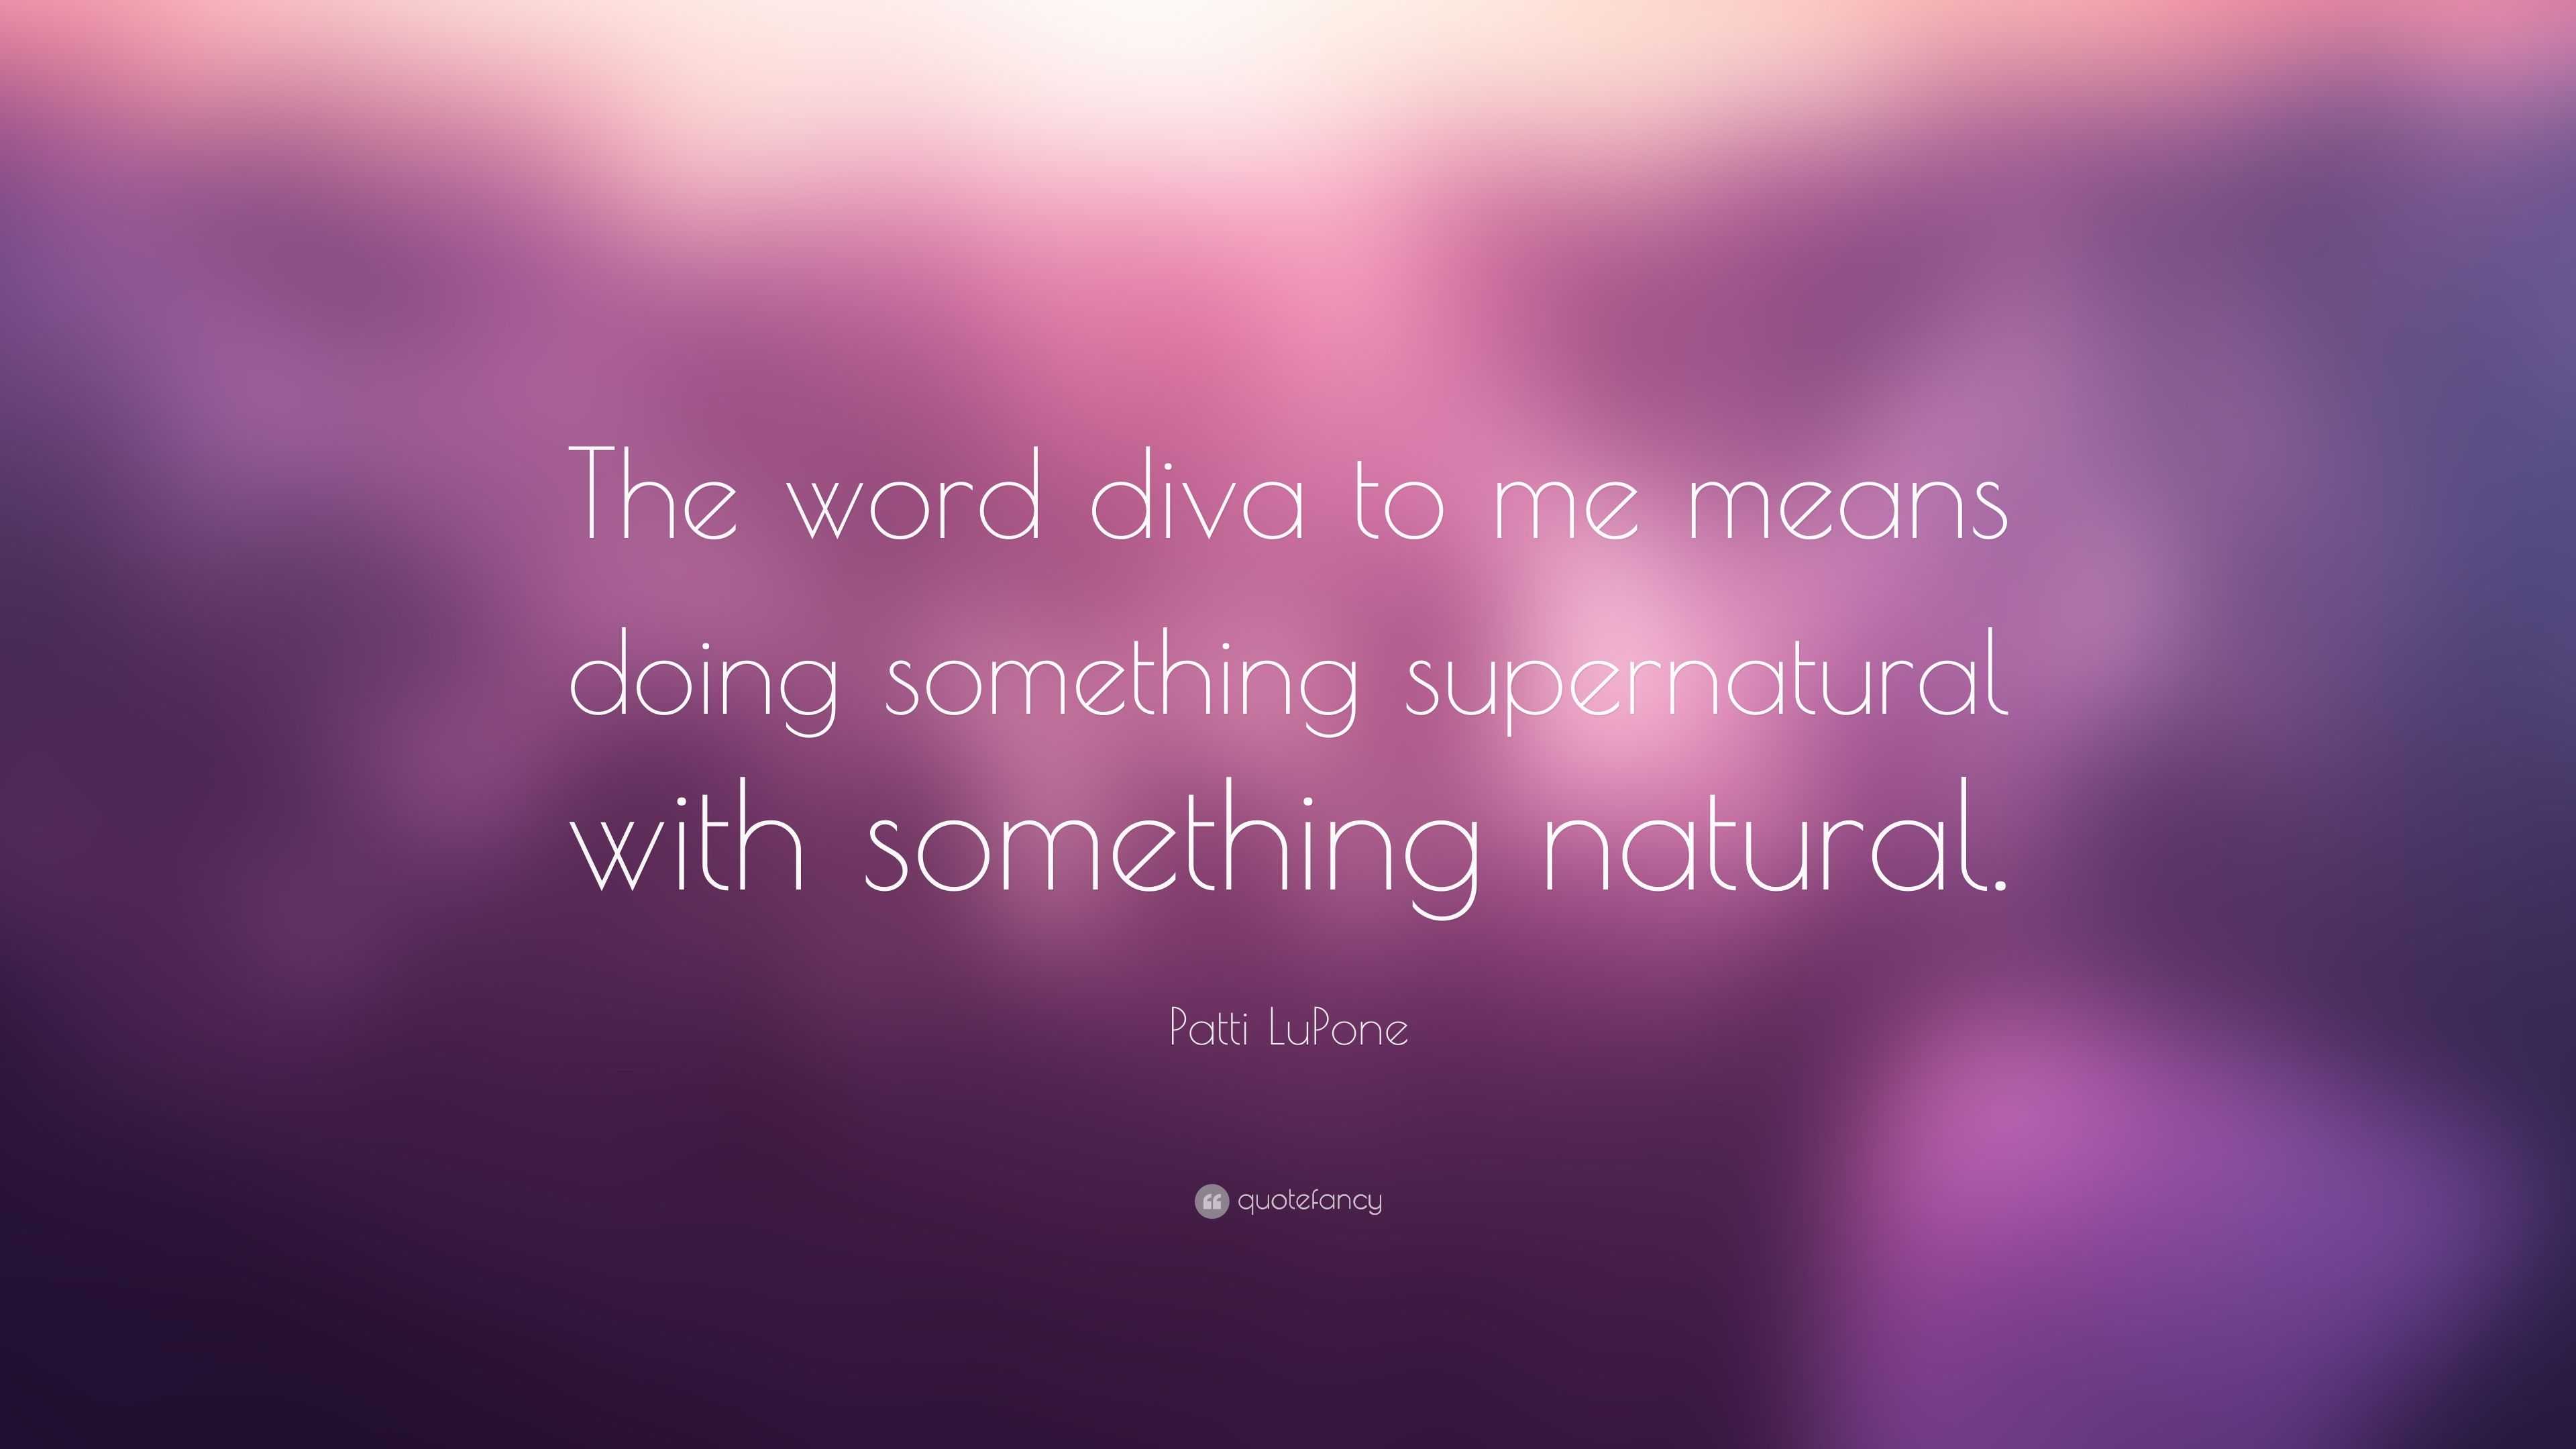 Evne dække over Potentiel Patti LuPone Quote: “The word diva to me means doing something supernatural  with something natural.”